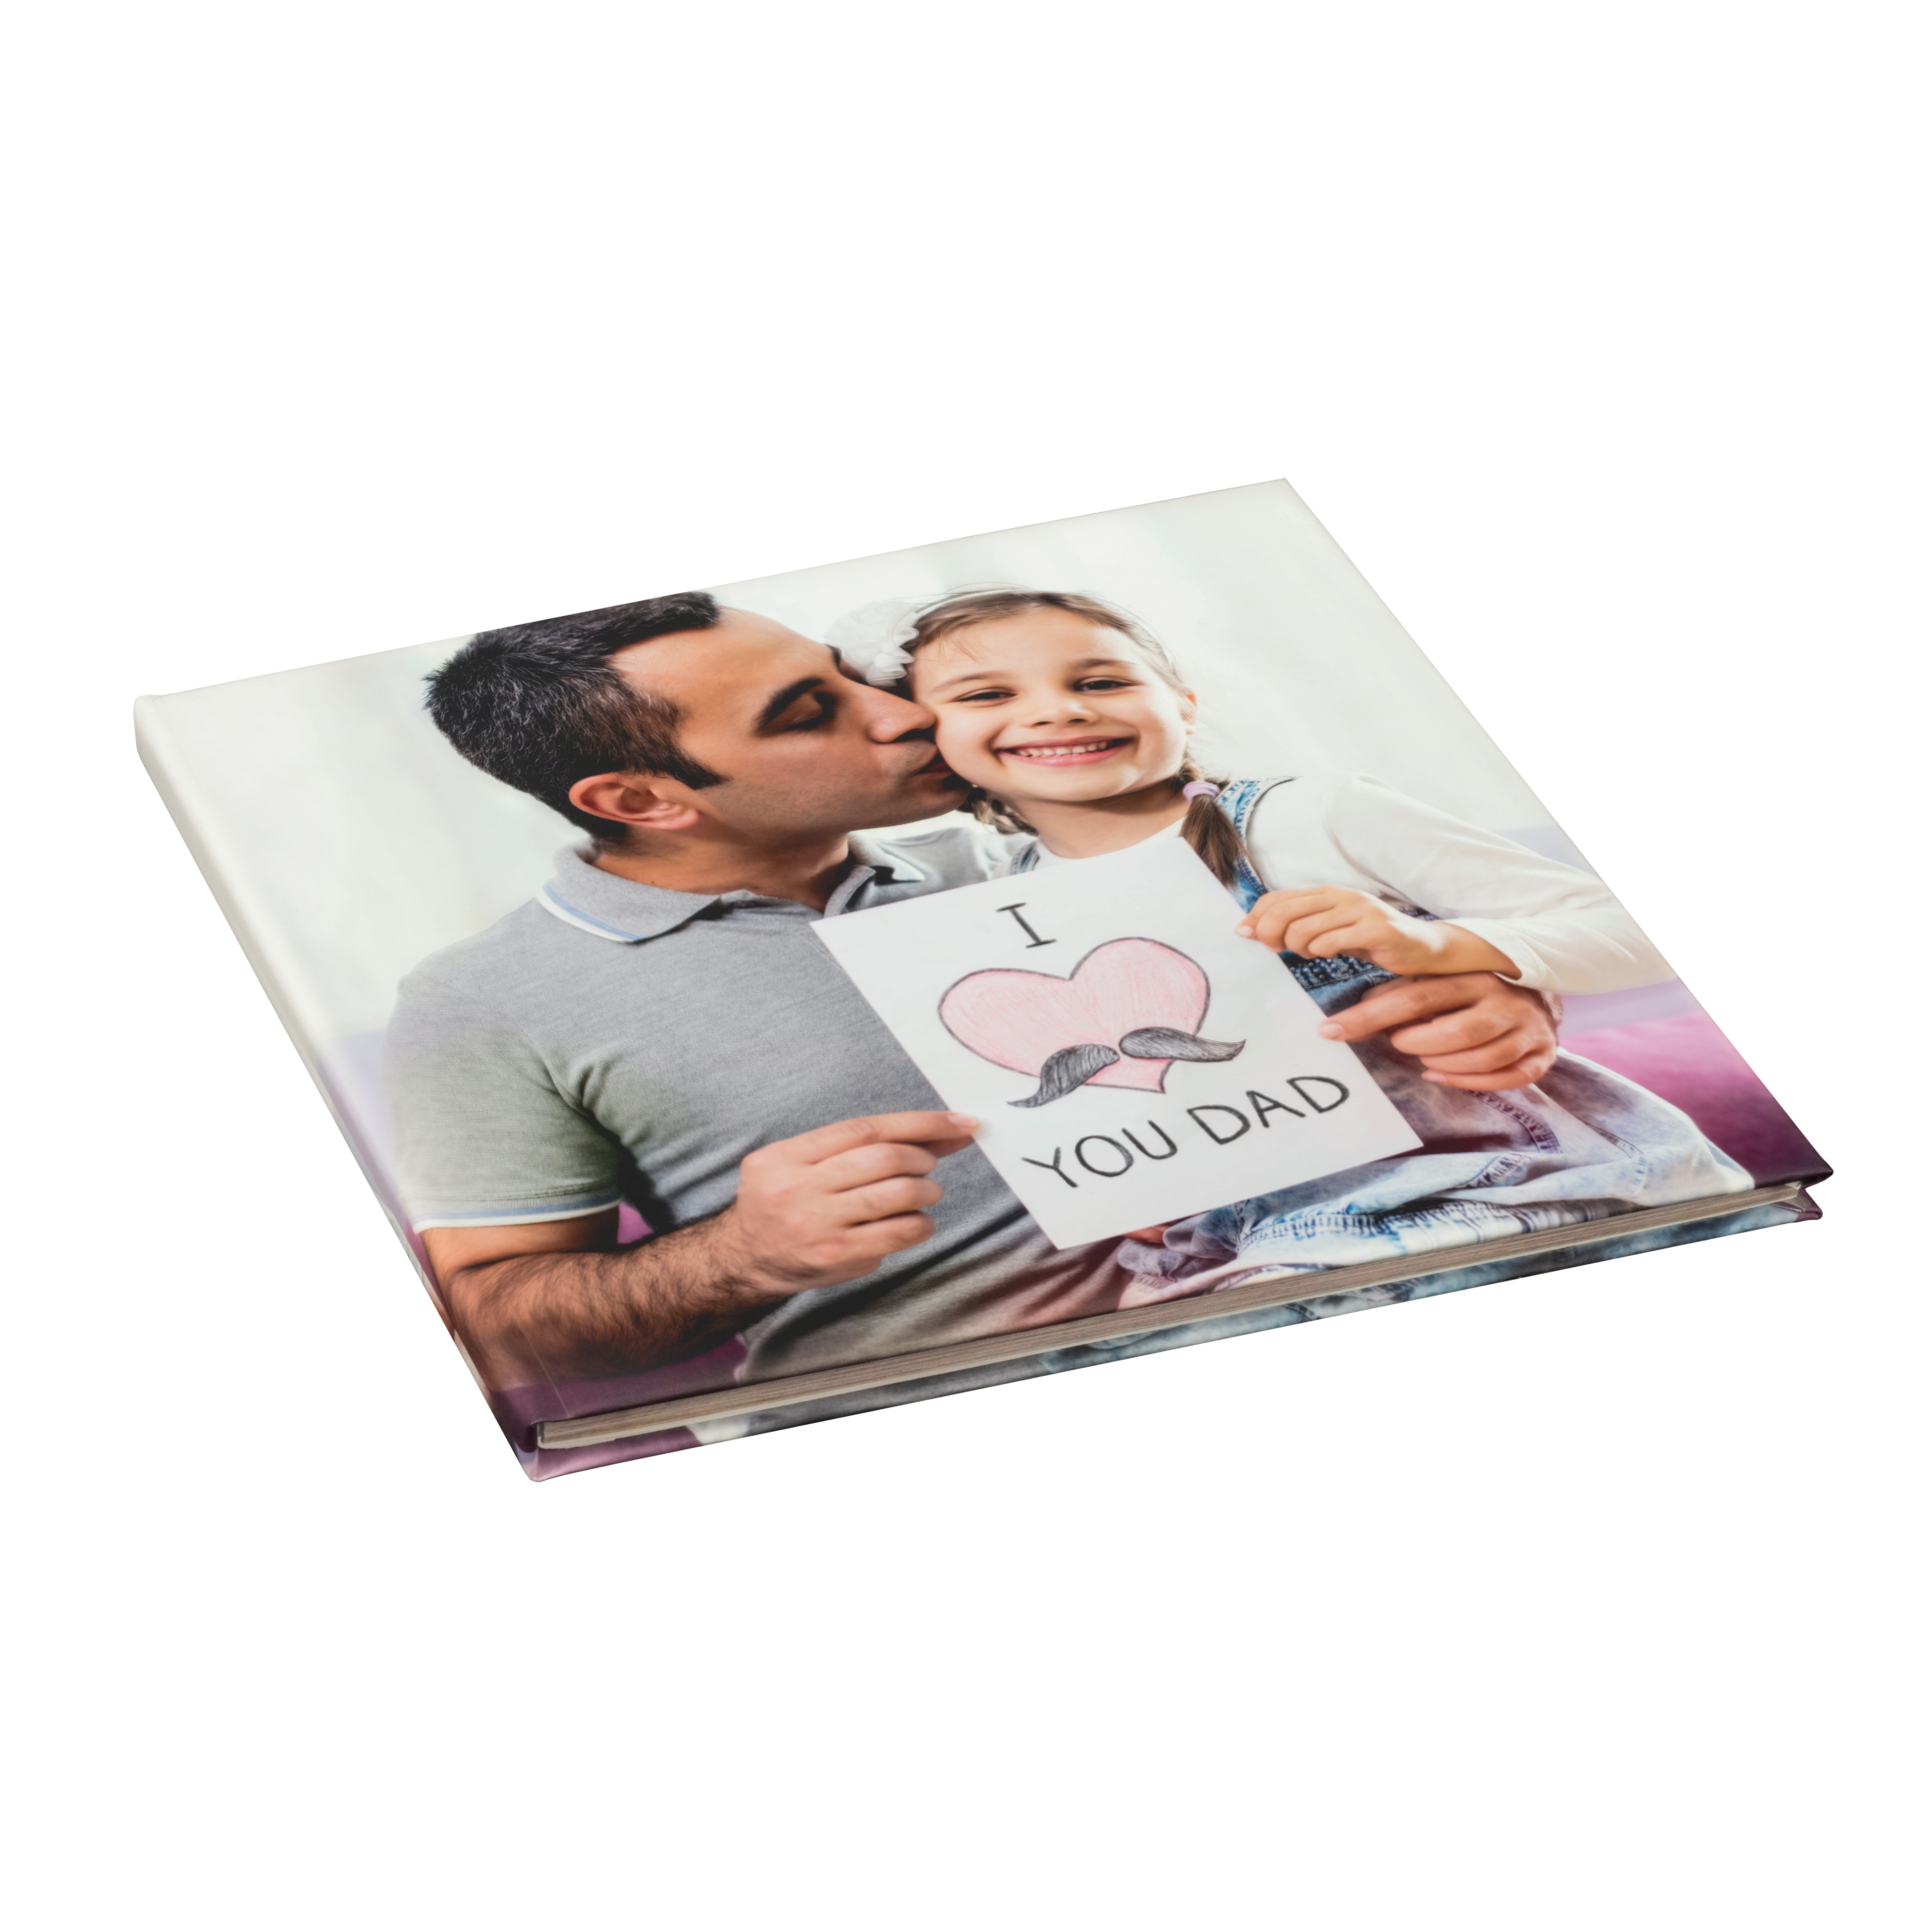 8x8 Hardcover Photo Book with Custom Cover - Nixplay Digital Frames